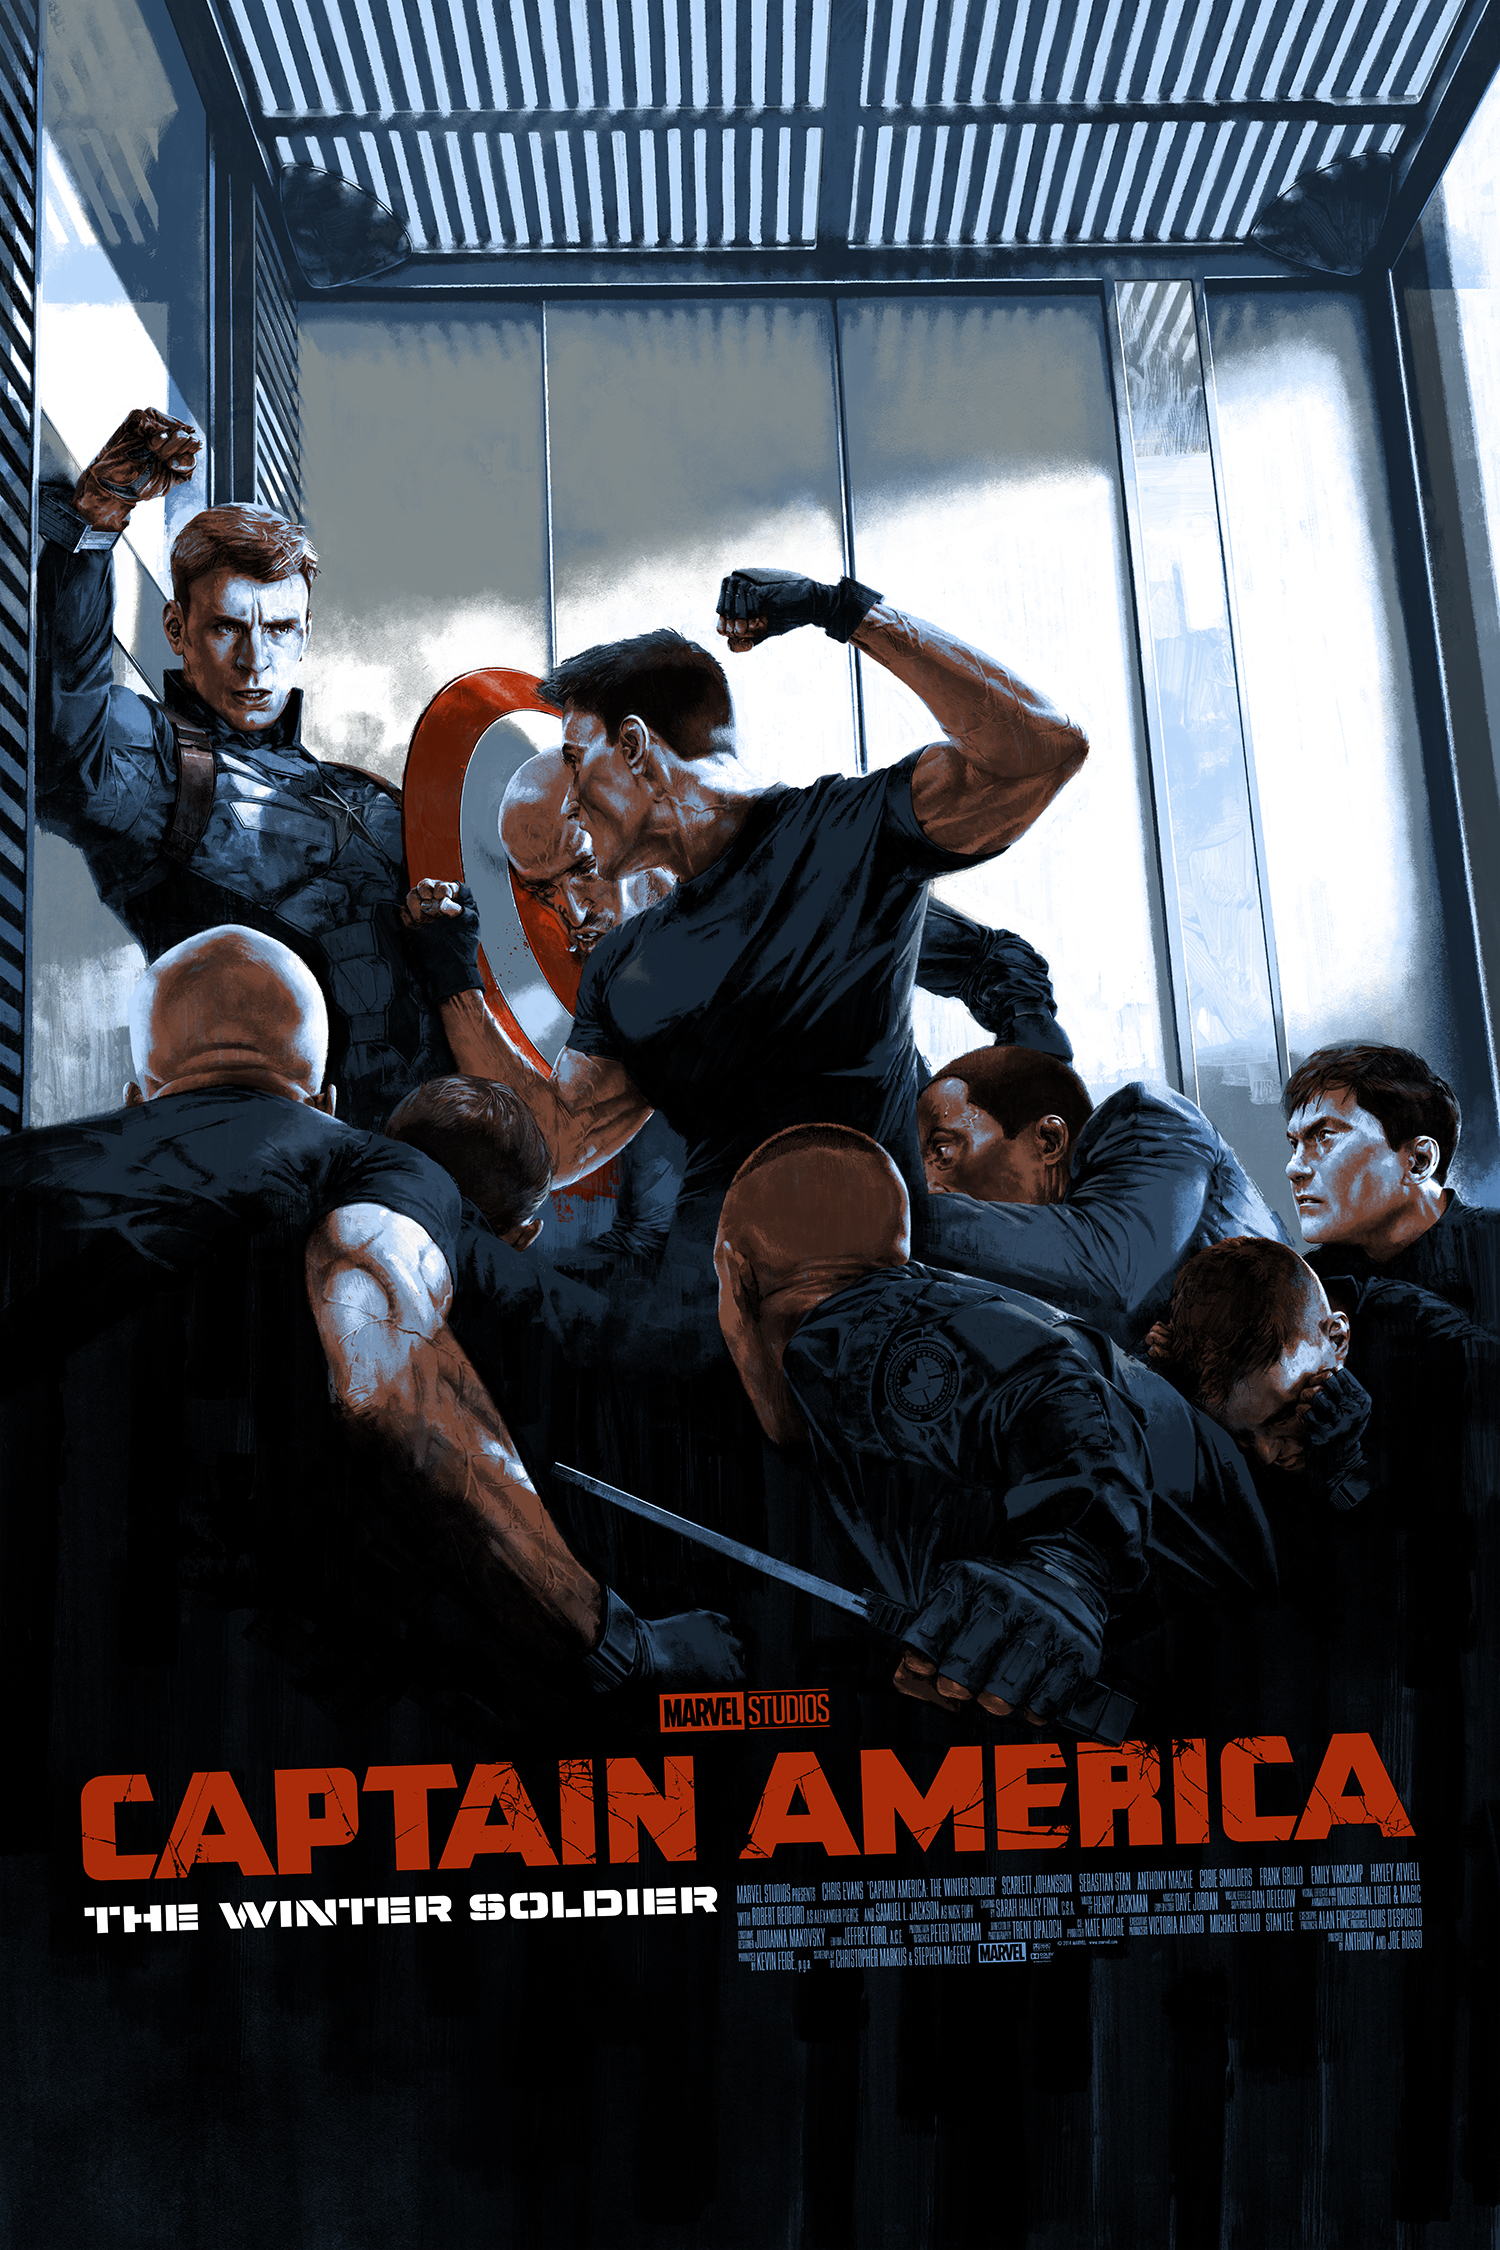 Captain America: The Winter Soldier by Aspinall (Variant)